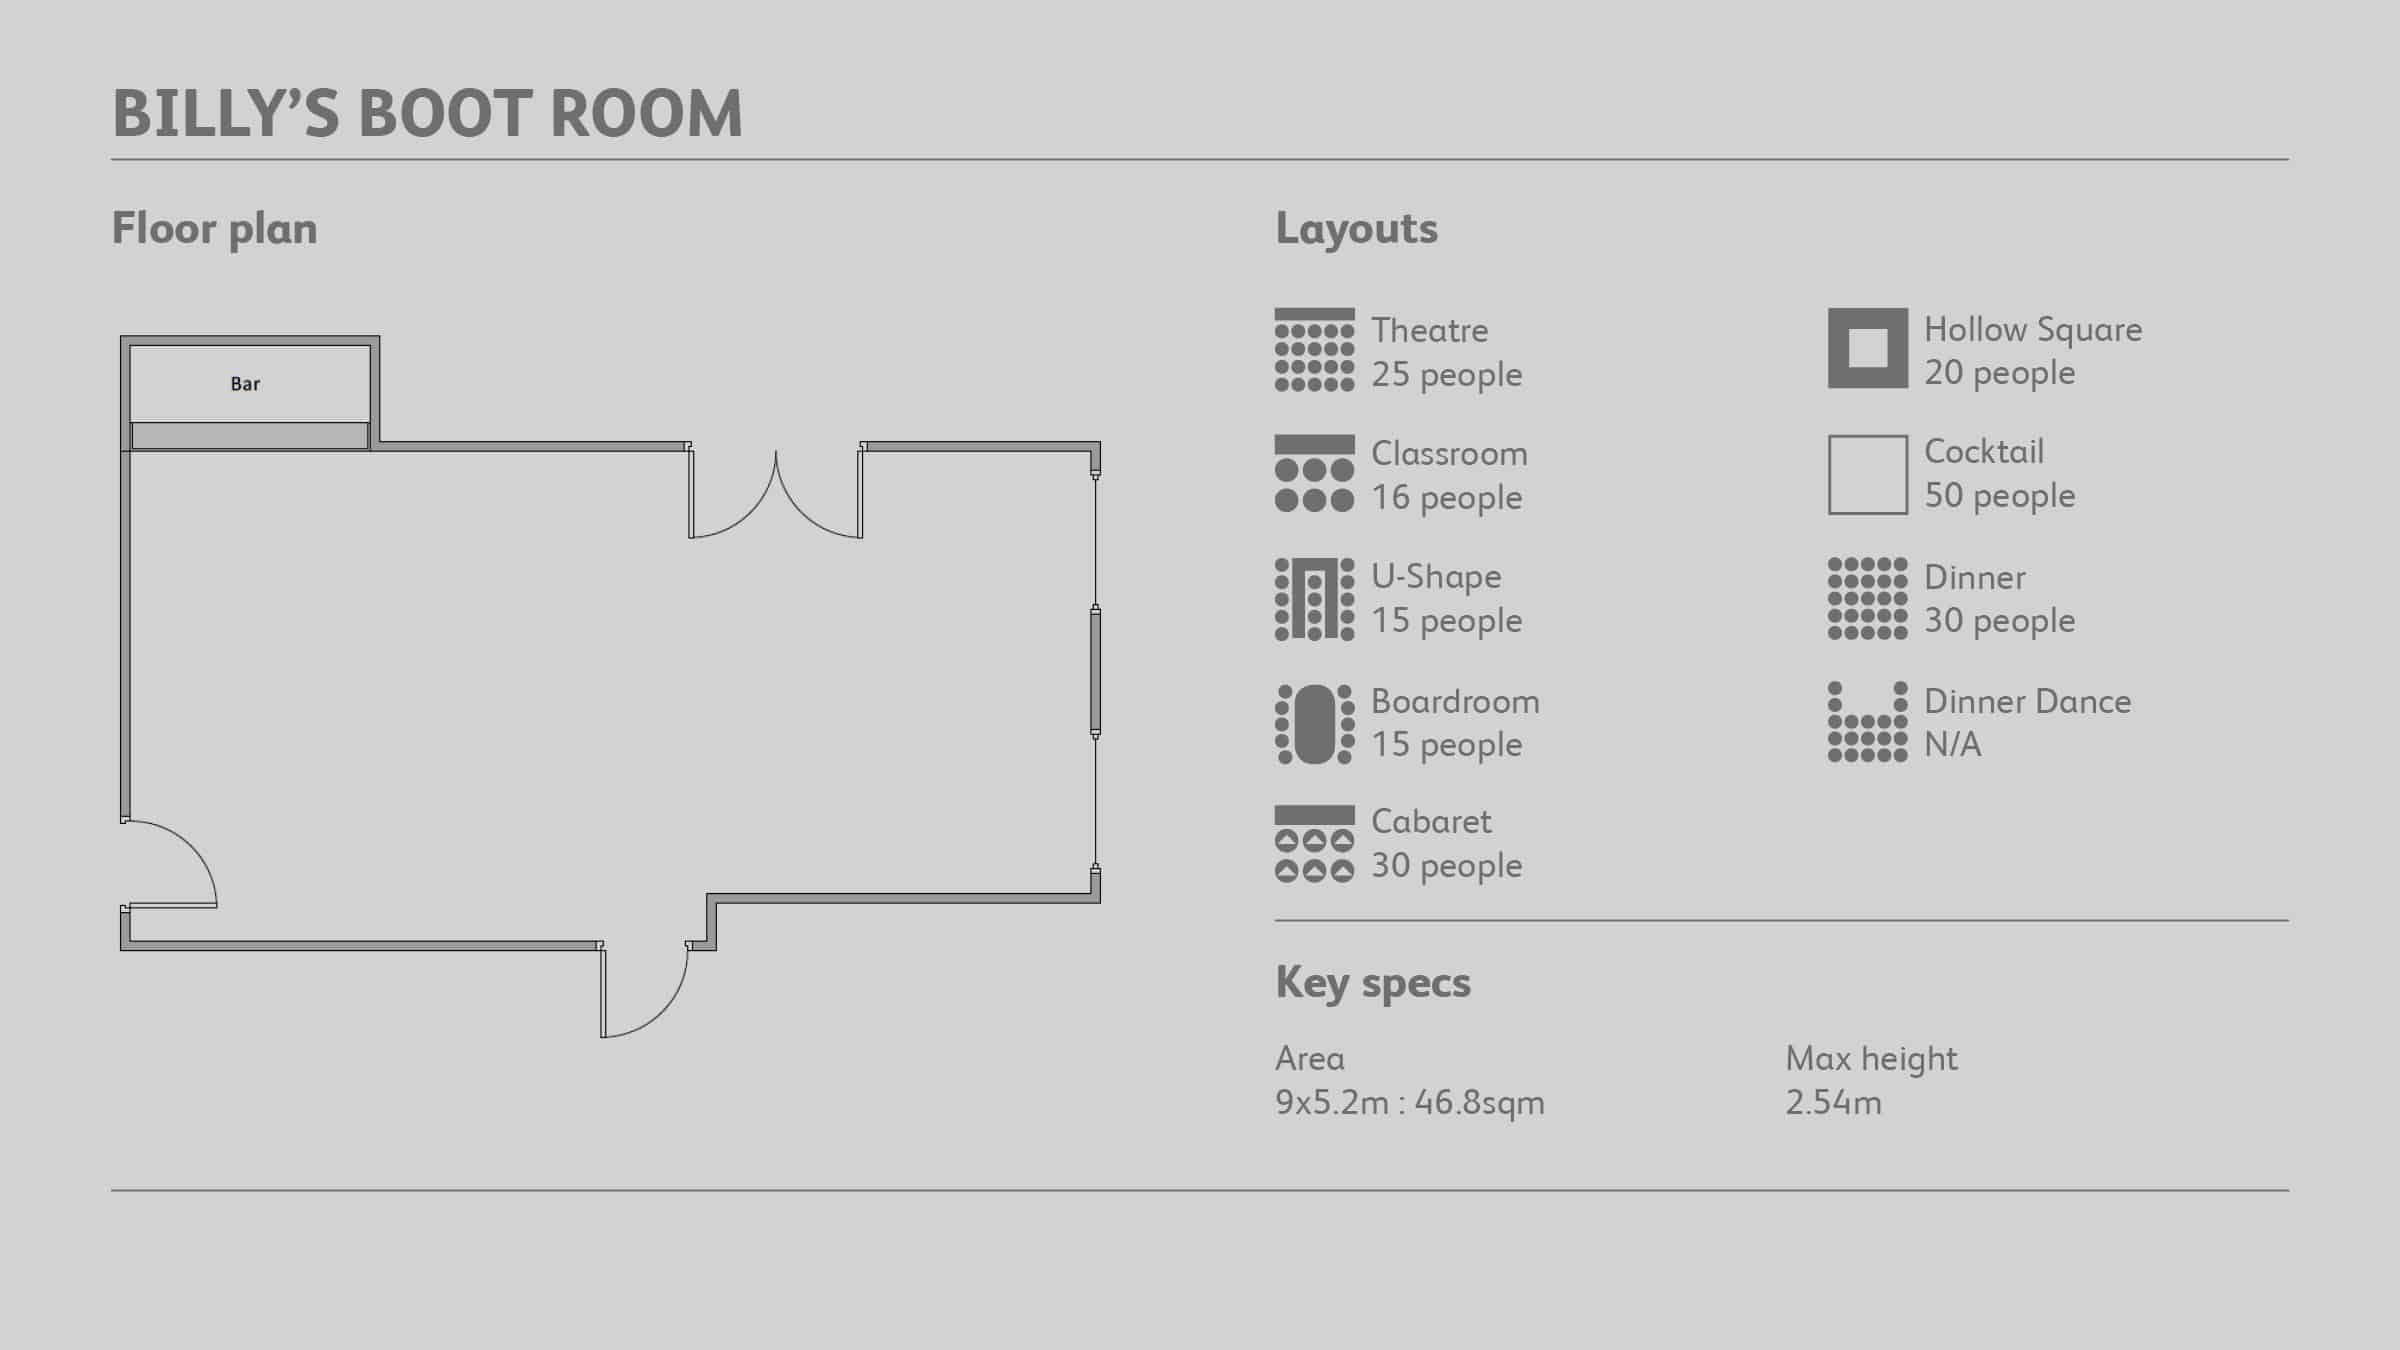 Floor plan of Billy's Boot Room at Molineux